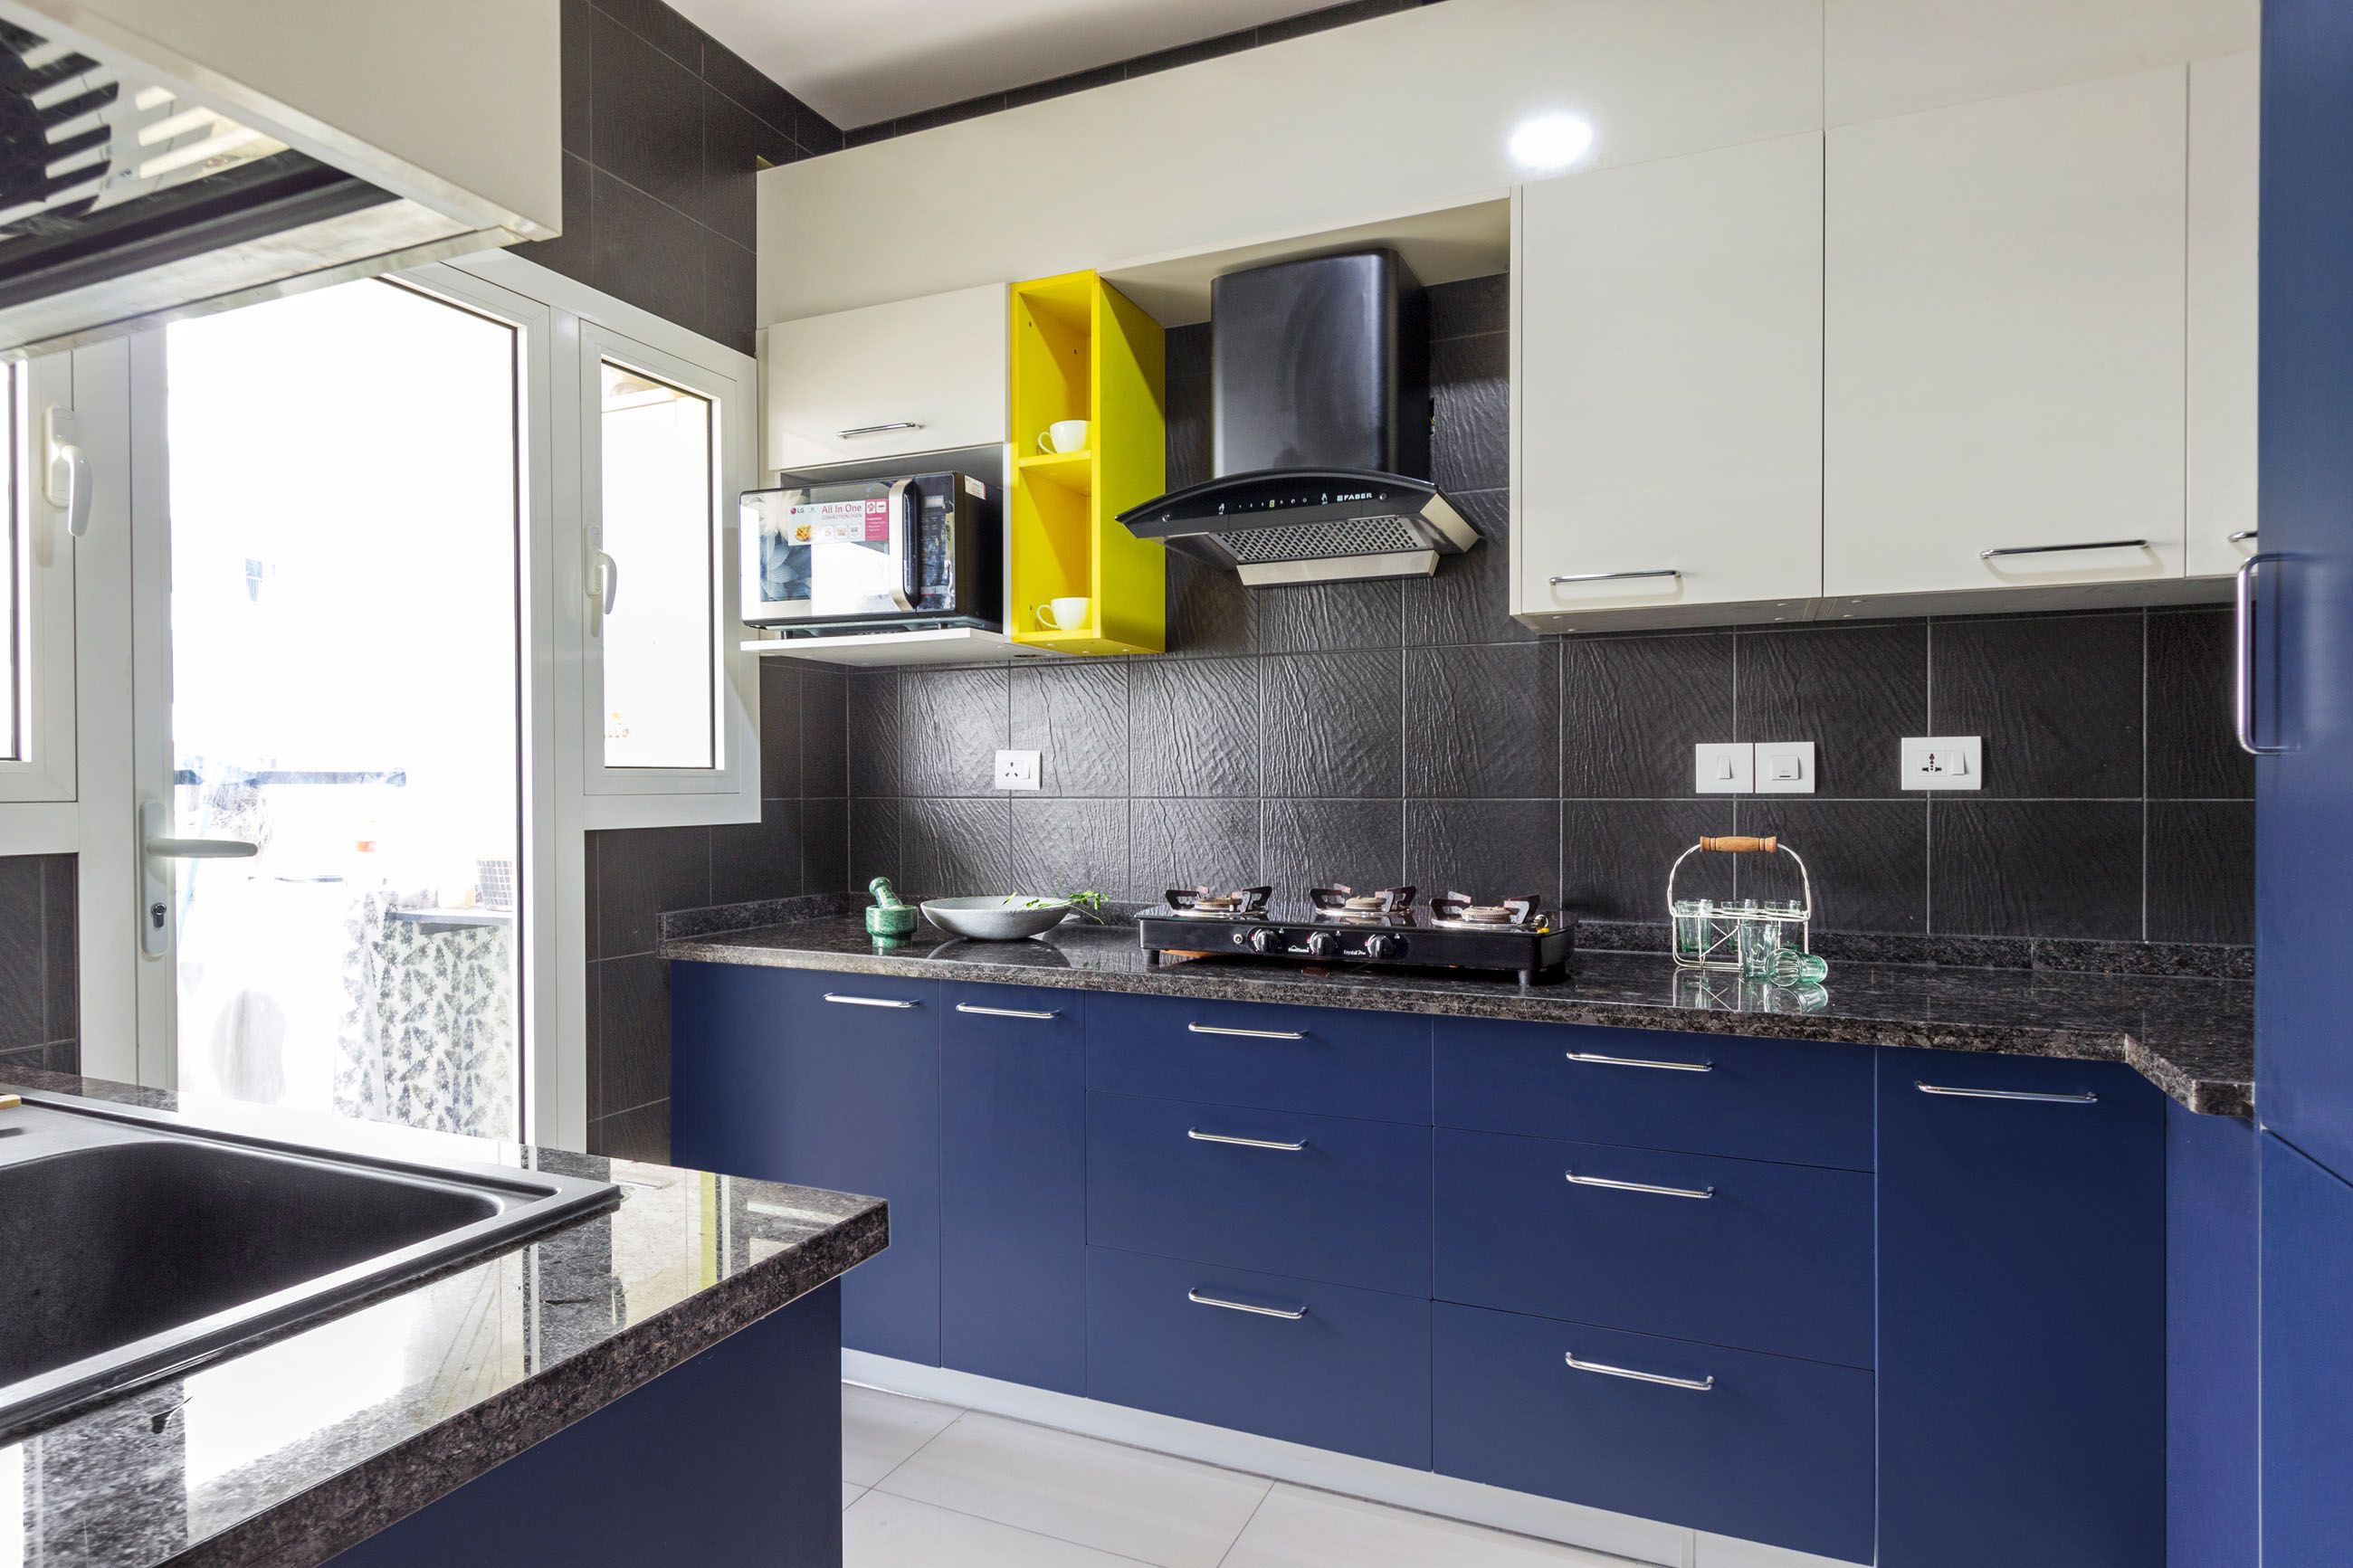 Contemporary Modular Blue And Champagne-Toned L Shaped Kitchen Cabinet Design With Dark Grey Textured Backsplash